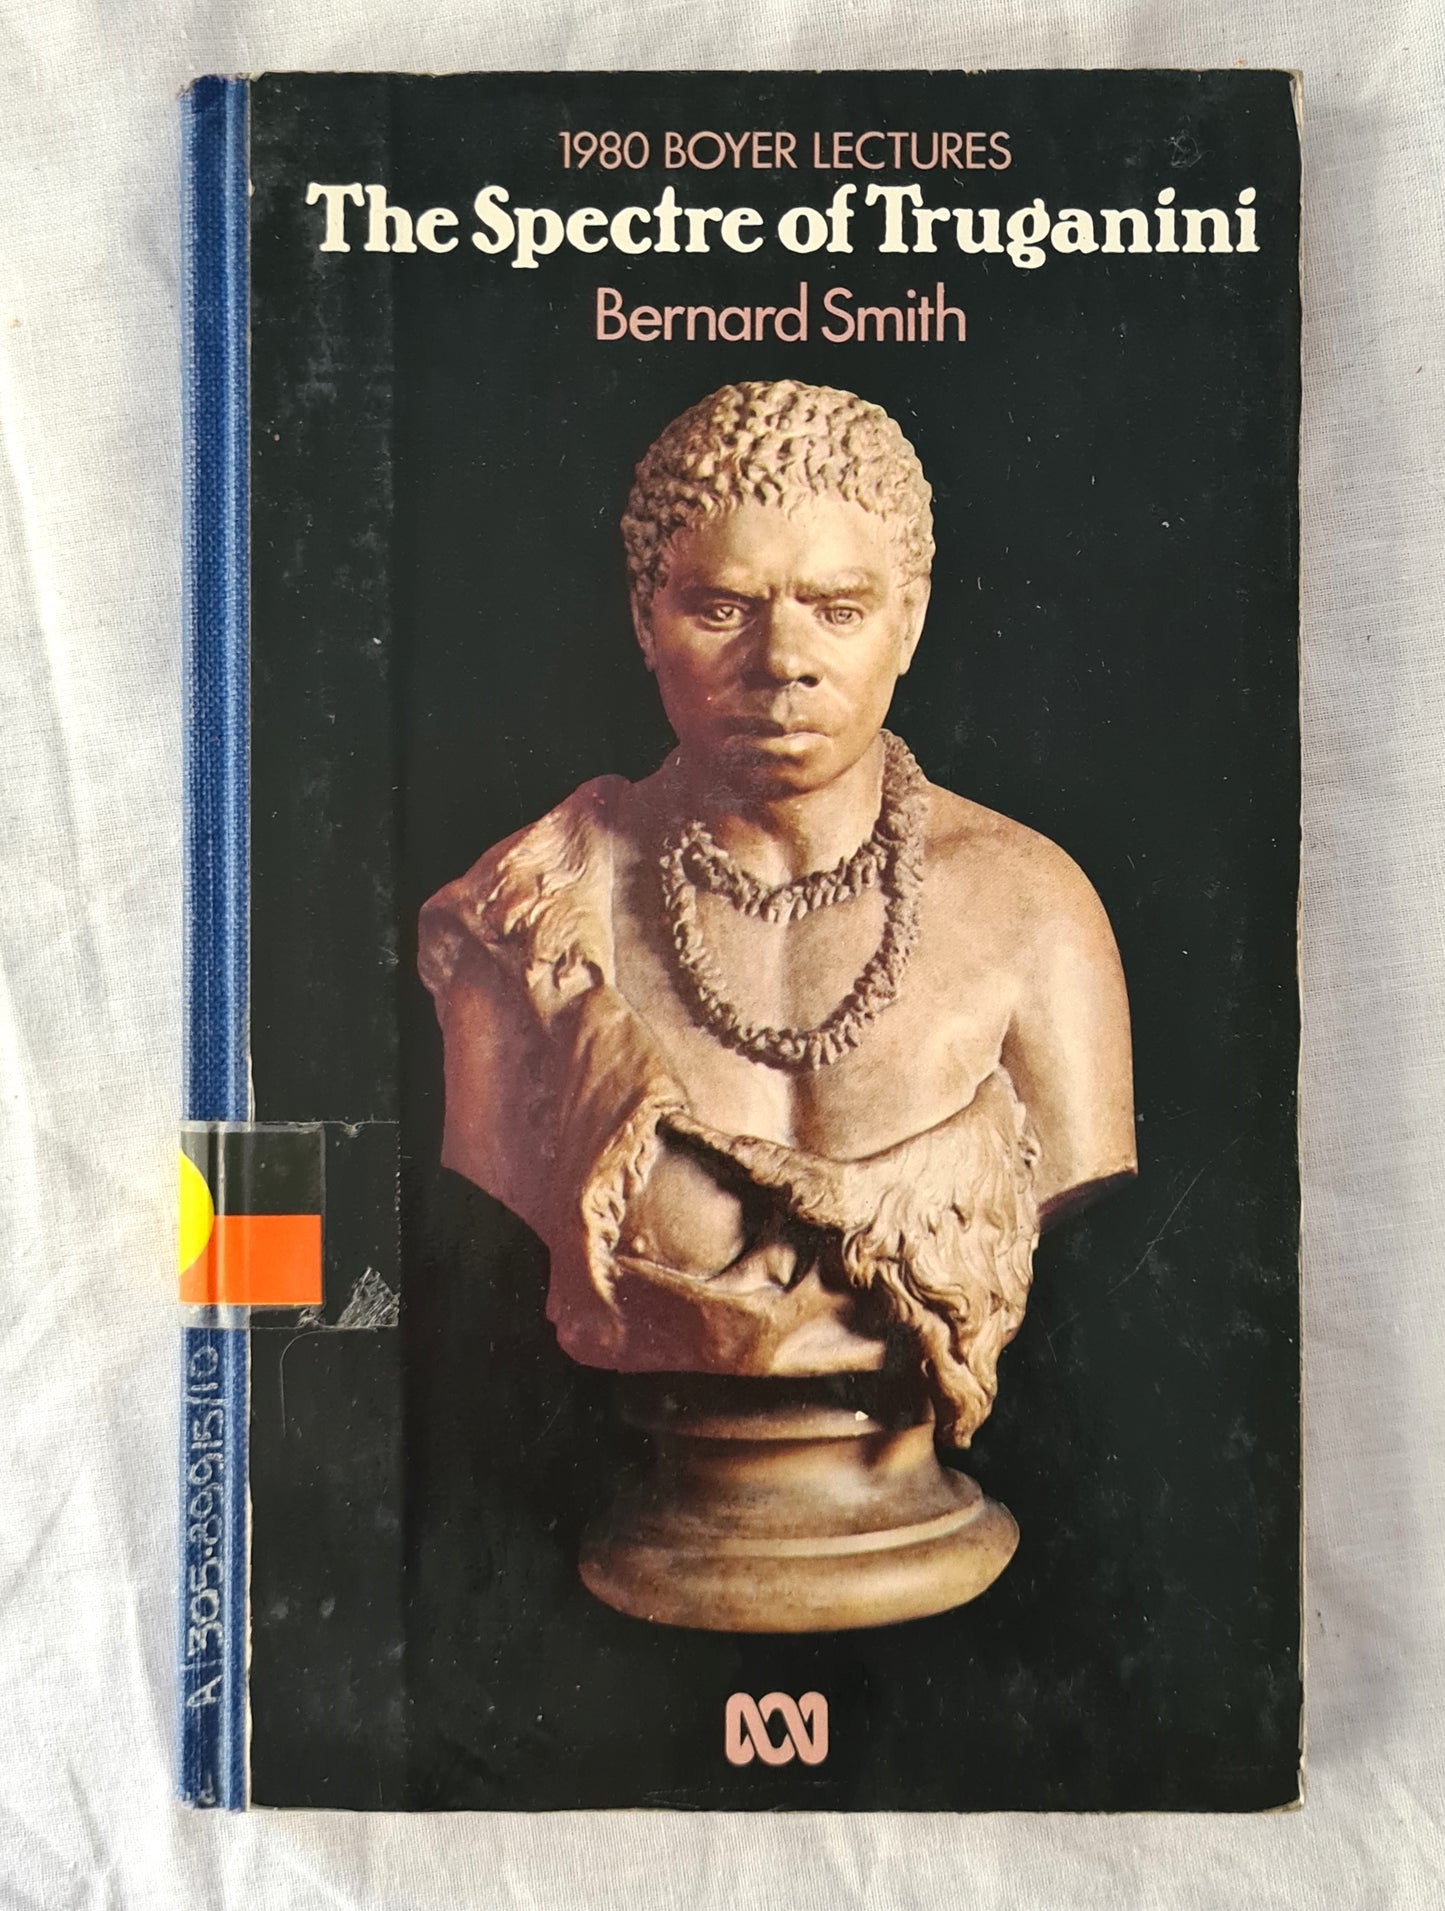 The Spectre of Truganini  1980 Boyer Lectures  by Bernard Smith